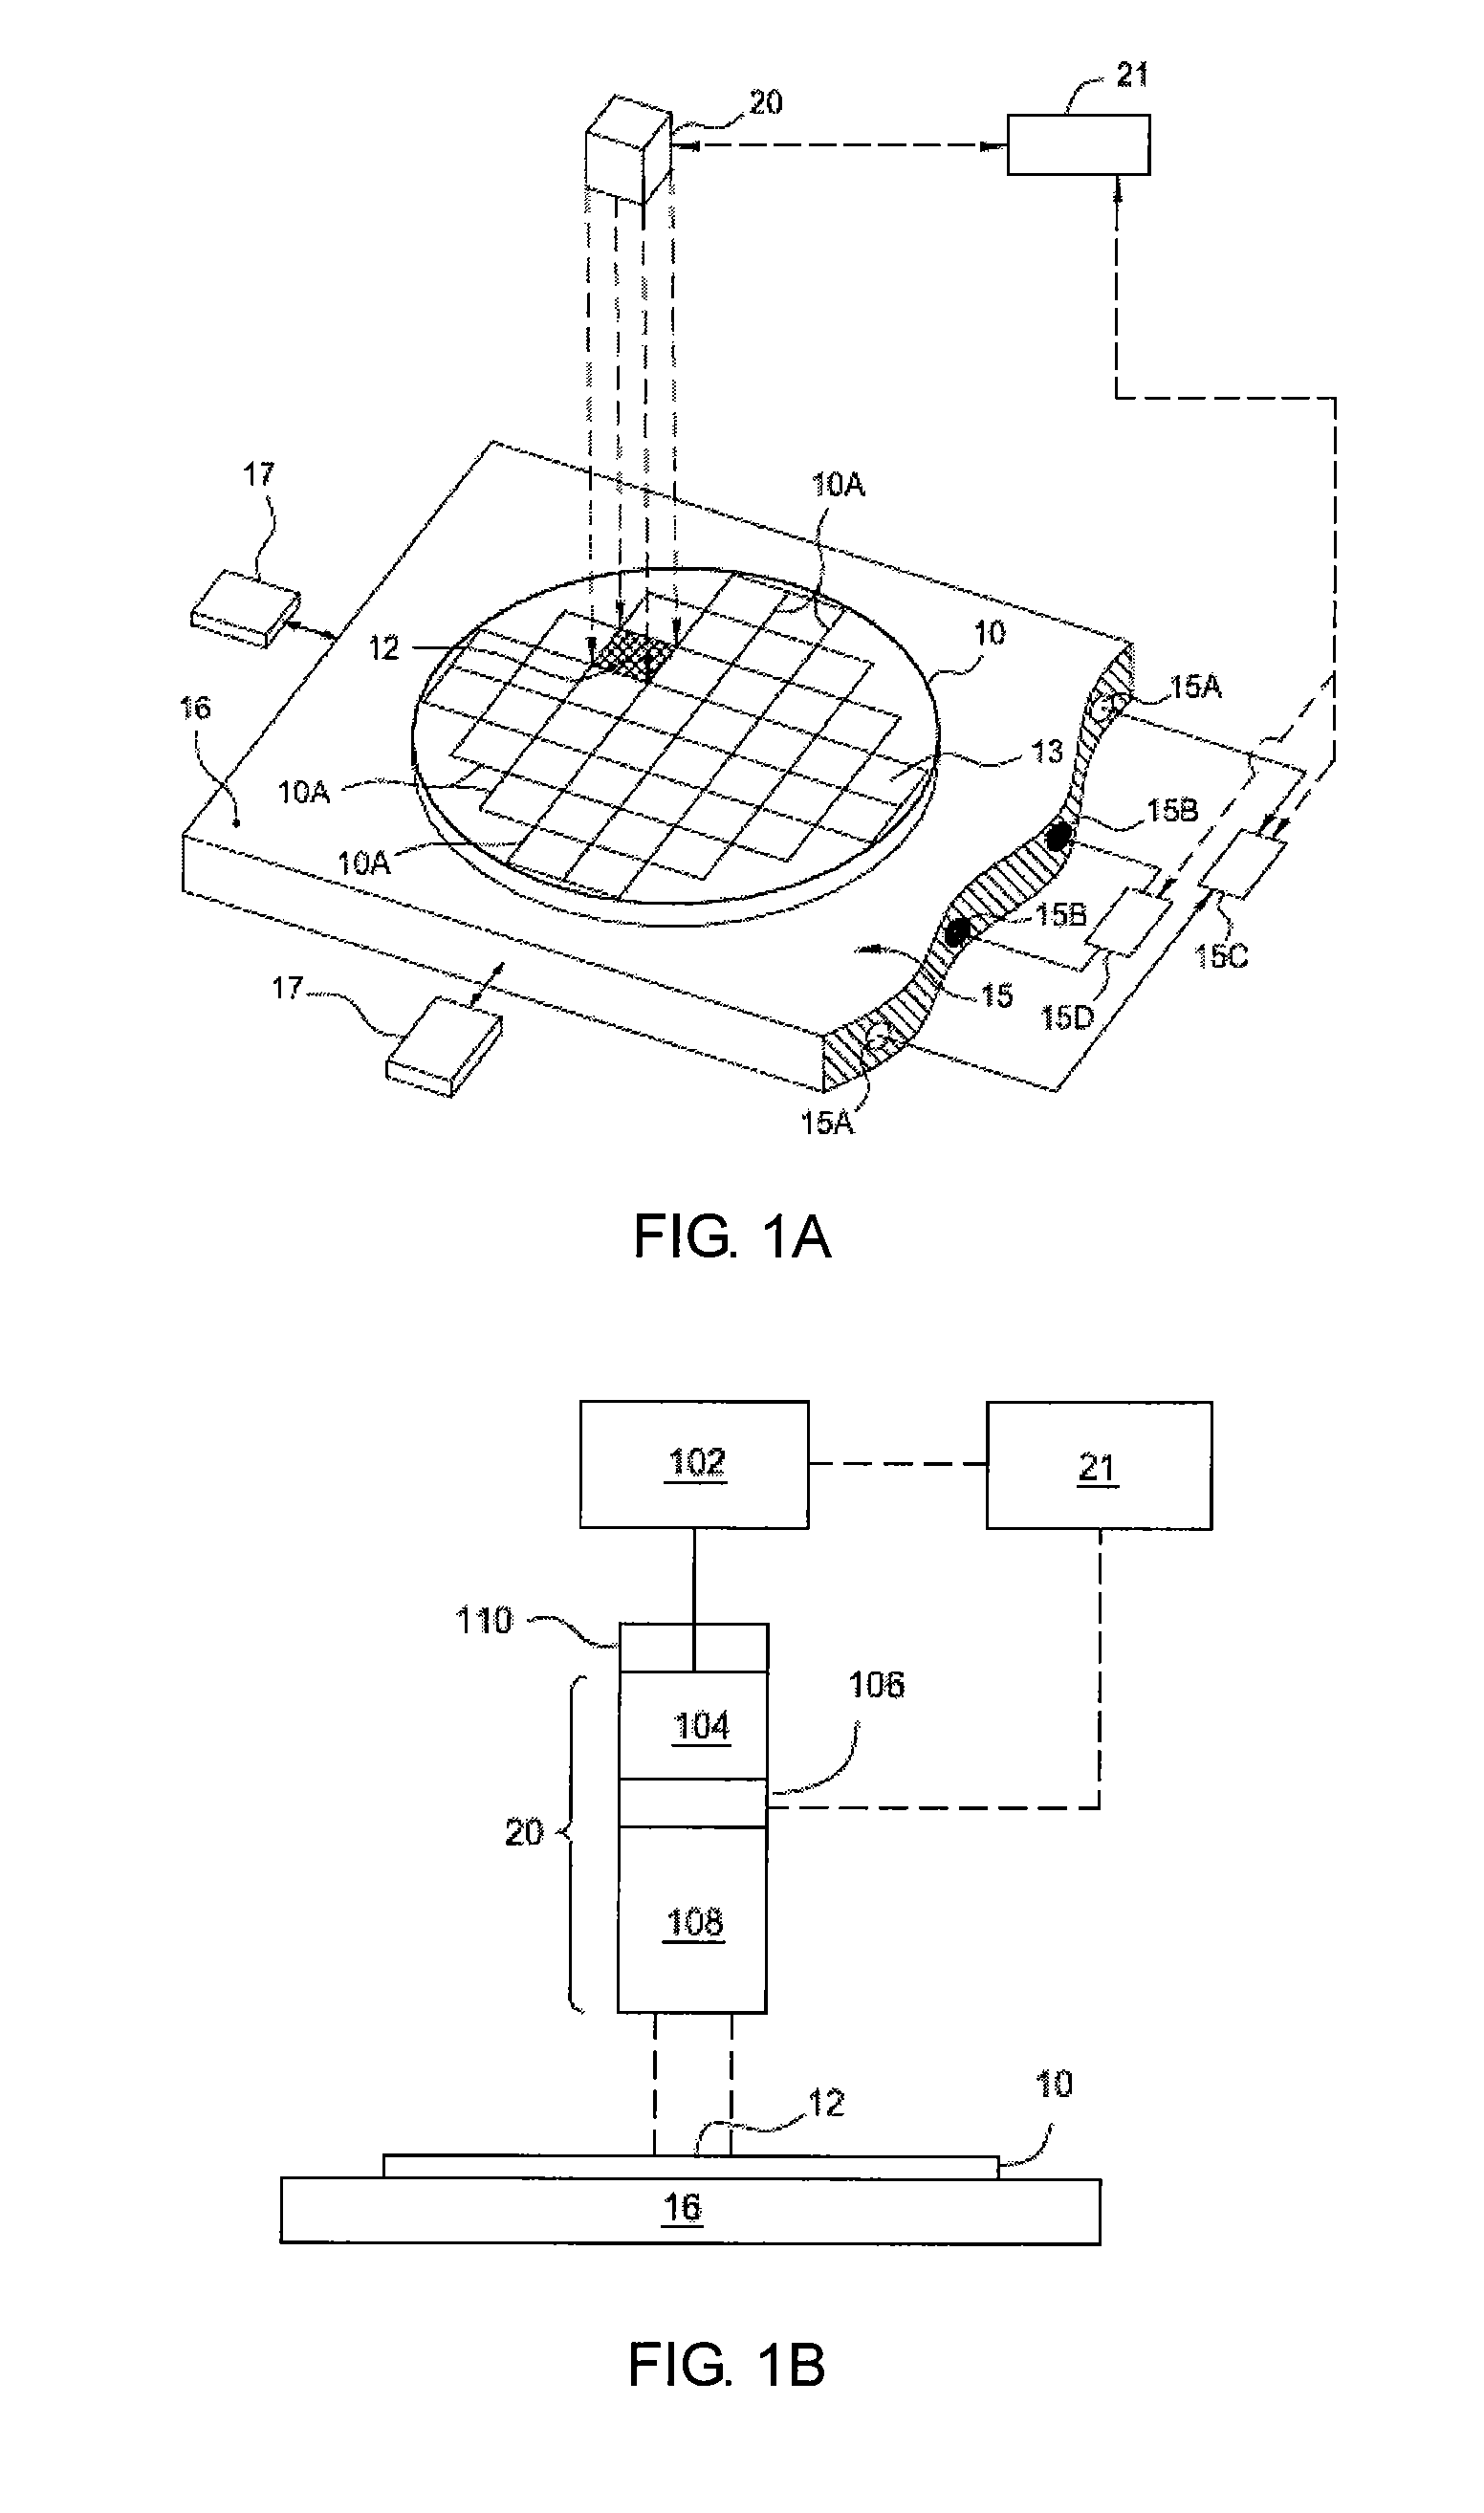 Providing group v and group vi over pressure for thermal treatment of compound semiconductor thin films